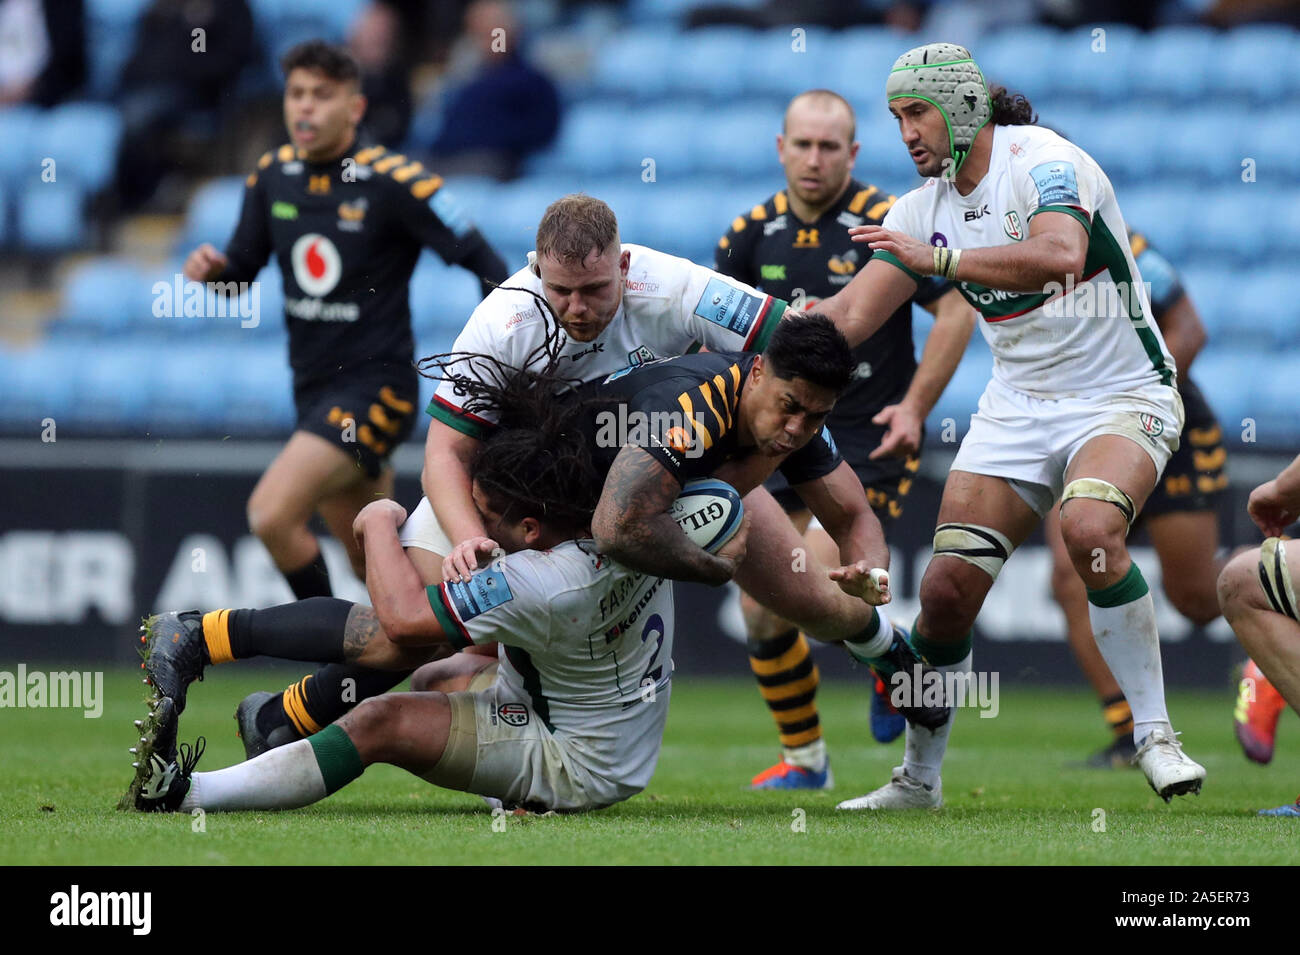 Wasps' Malakai Fekitoa is tackled by London Irish's Saia Fainga'a and Harry Elrington during the Gallagher Premiership match at the Ricoh Arena, Coventry. Stock Photo